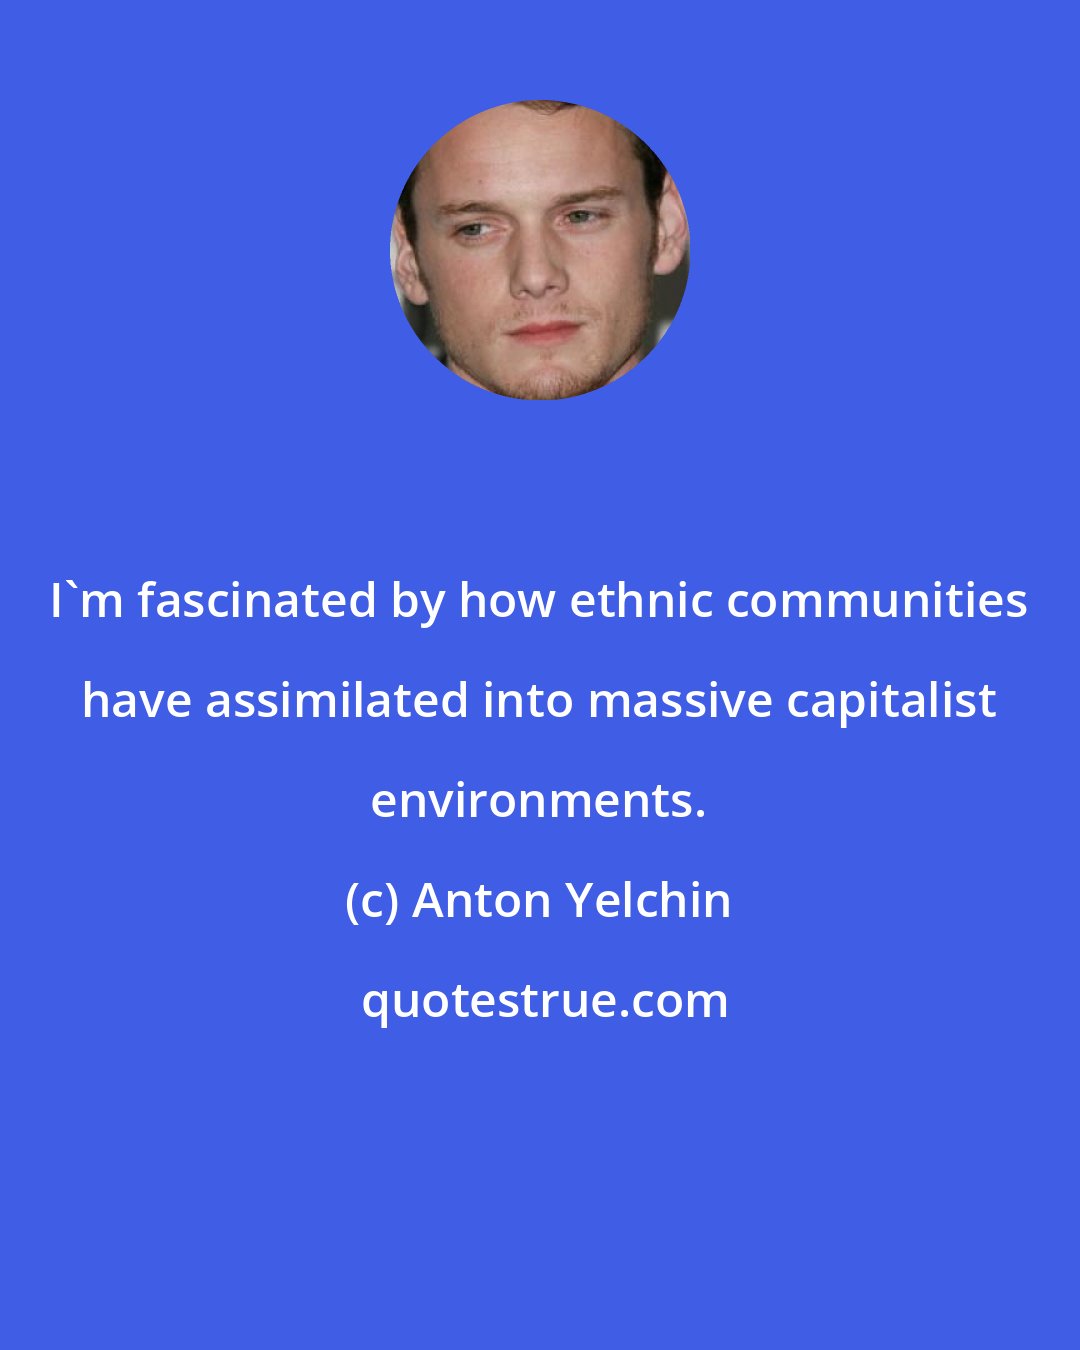 Anton Yelchin: I'm fascinated by how ethnic communities have assimilated into massive capitalist environments.